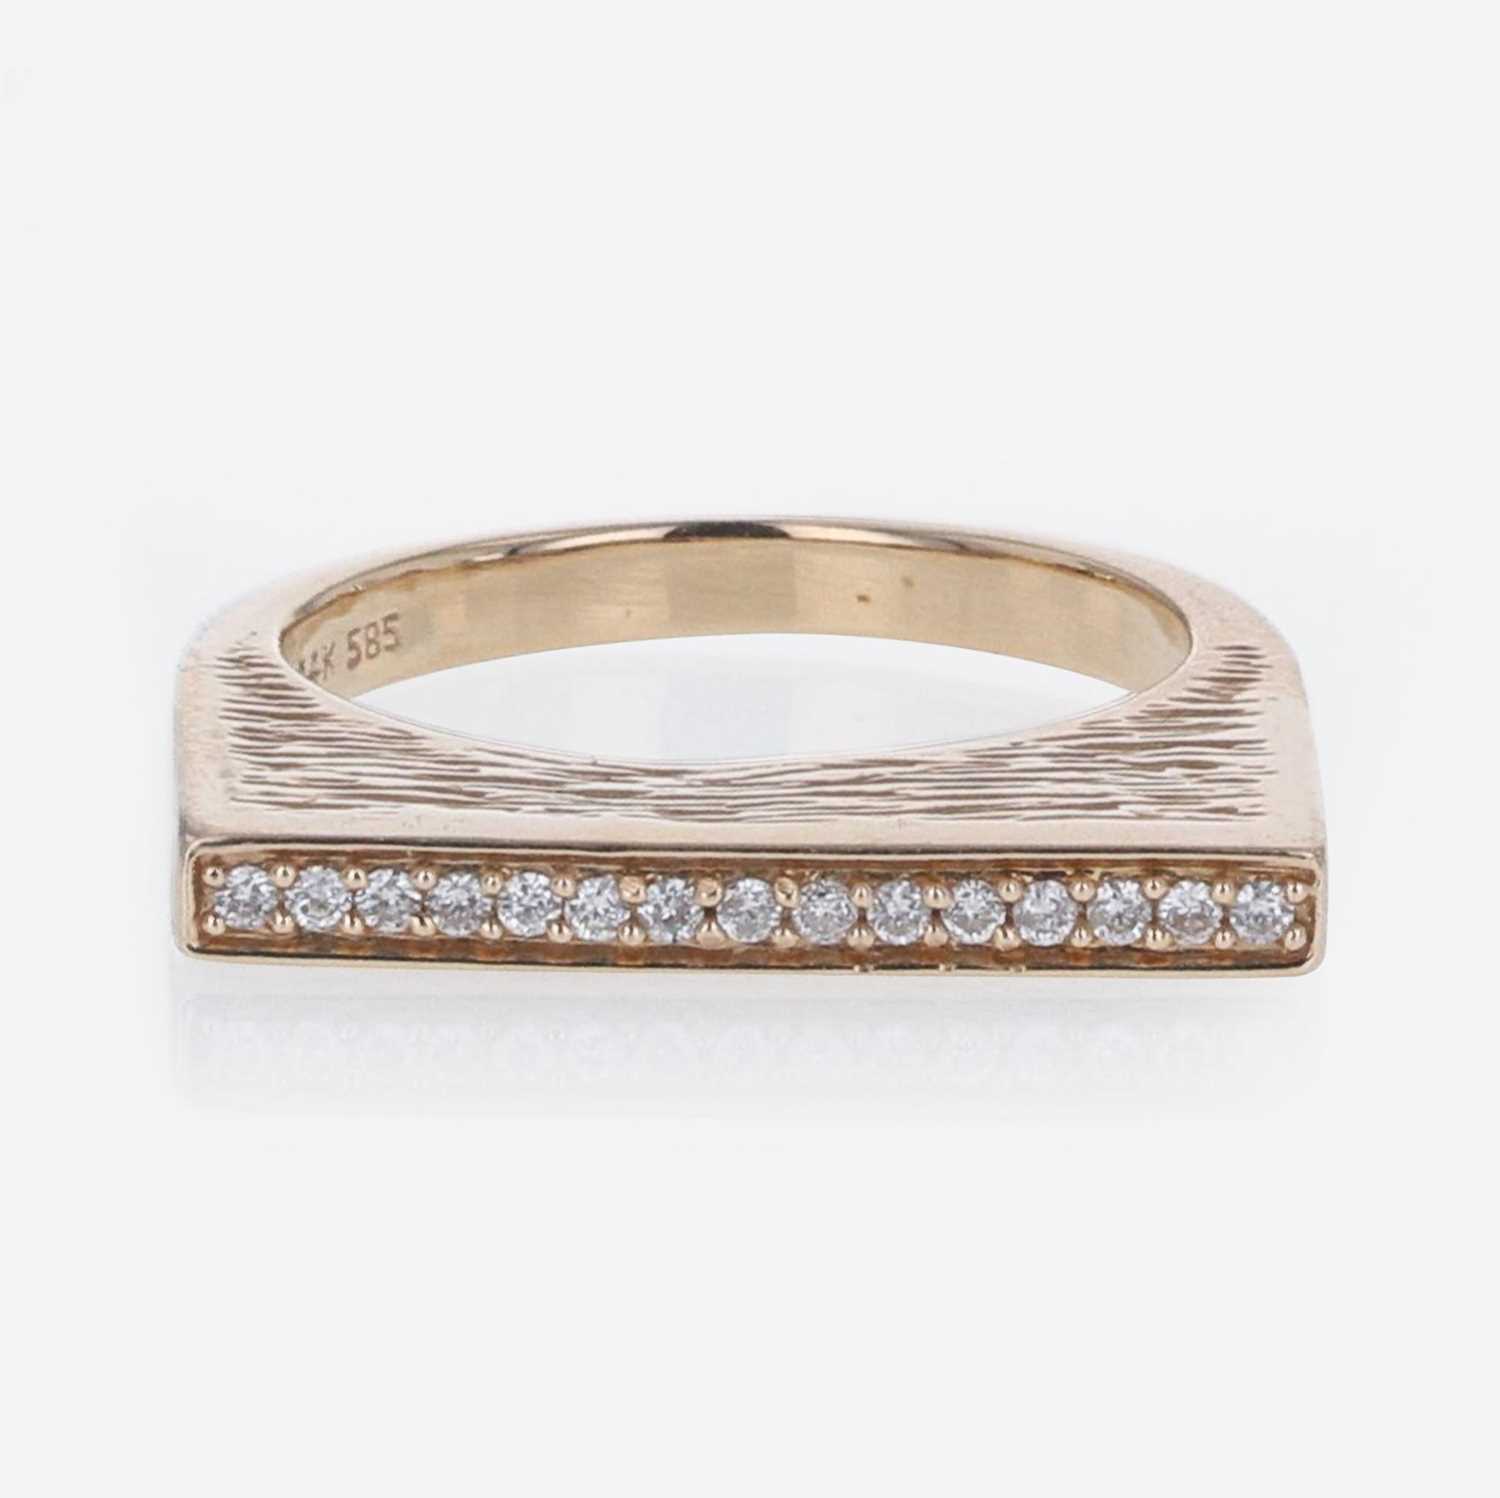 Lot 279 - A 14K Rose Gold and Diamond Ring